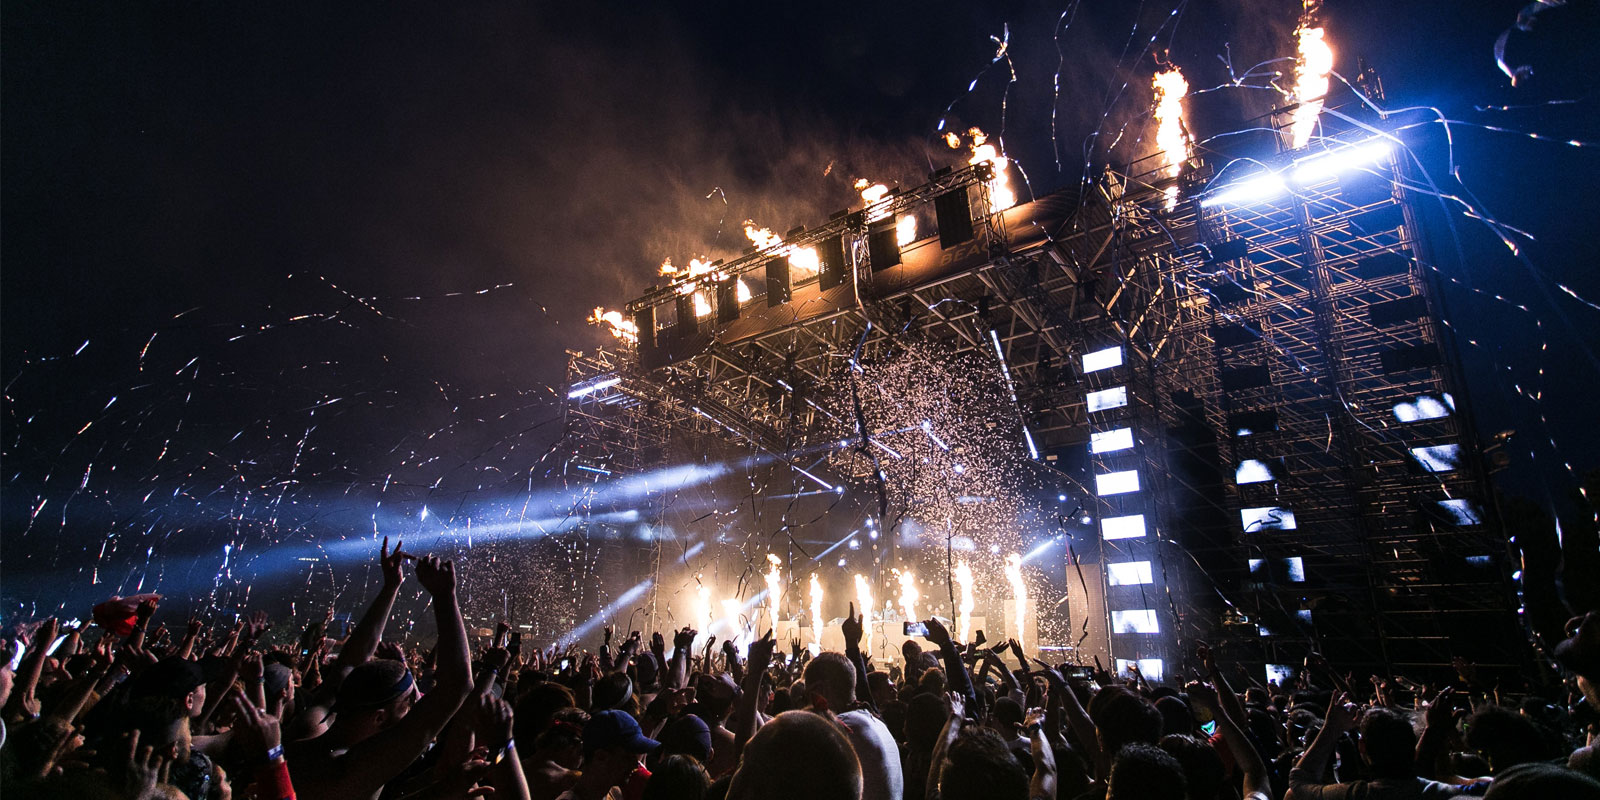 Outdoor music stage with pyrotechnics and crowd